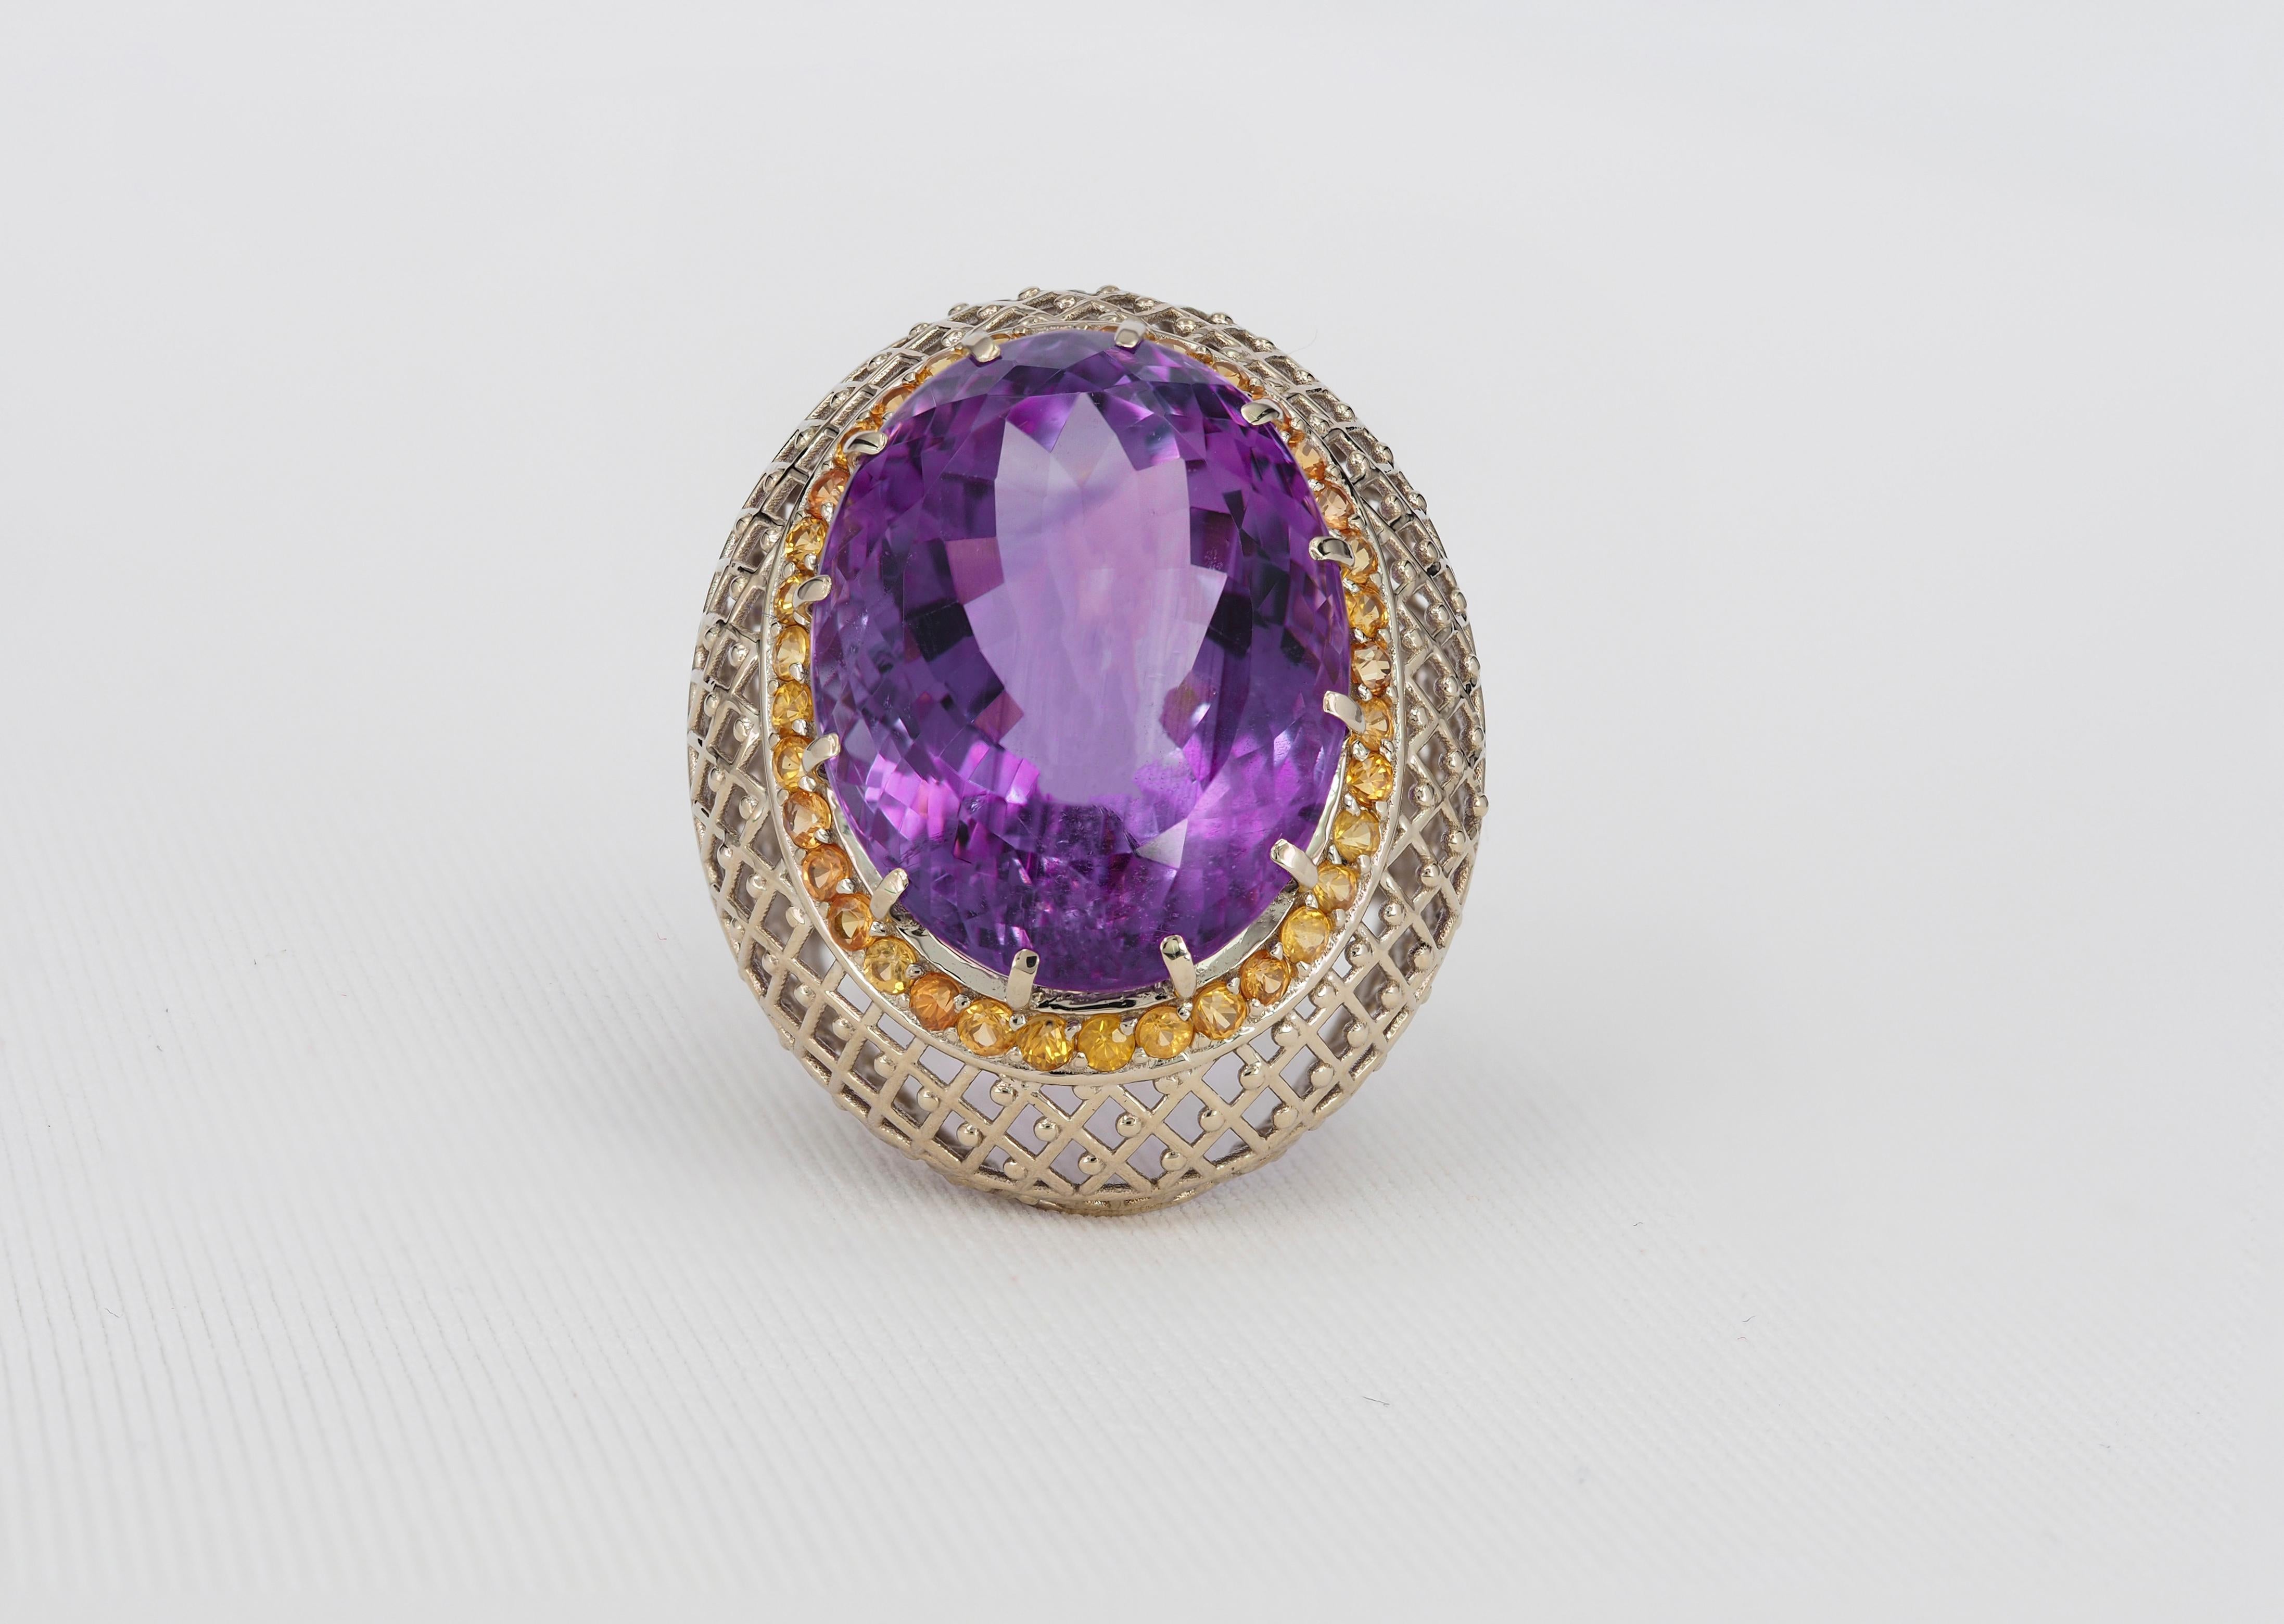 Oval cut amethyst cocktail ring with sapphires

Total weight 9.52 gr depends from size
14 k gold no hallmark (tested in lab)

Gemstones (all are tested by proffesional gemmologist)

Amethyst
1. Oval cut, -27 ct, transparent , purple-to violetcolor. 